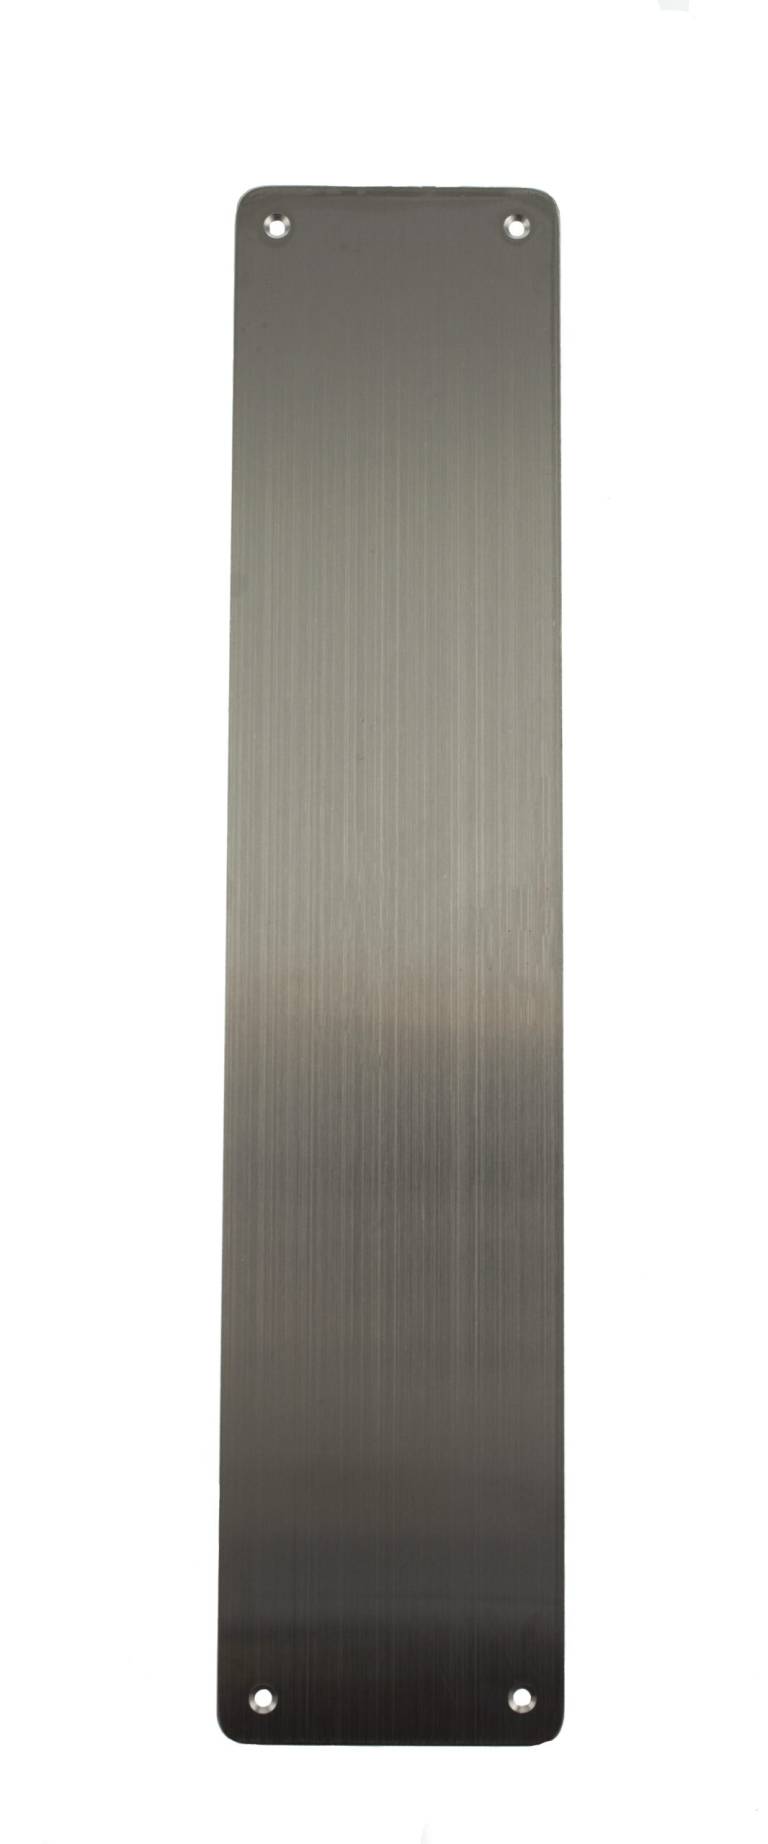 CTAFP35075SSS CleanTouch Finger Plate Pre drilled with screws 350mm x 75mm - Satin Stainless Steel